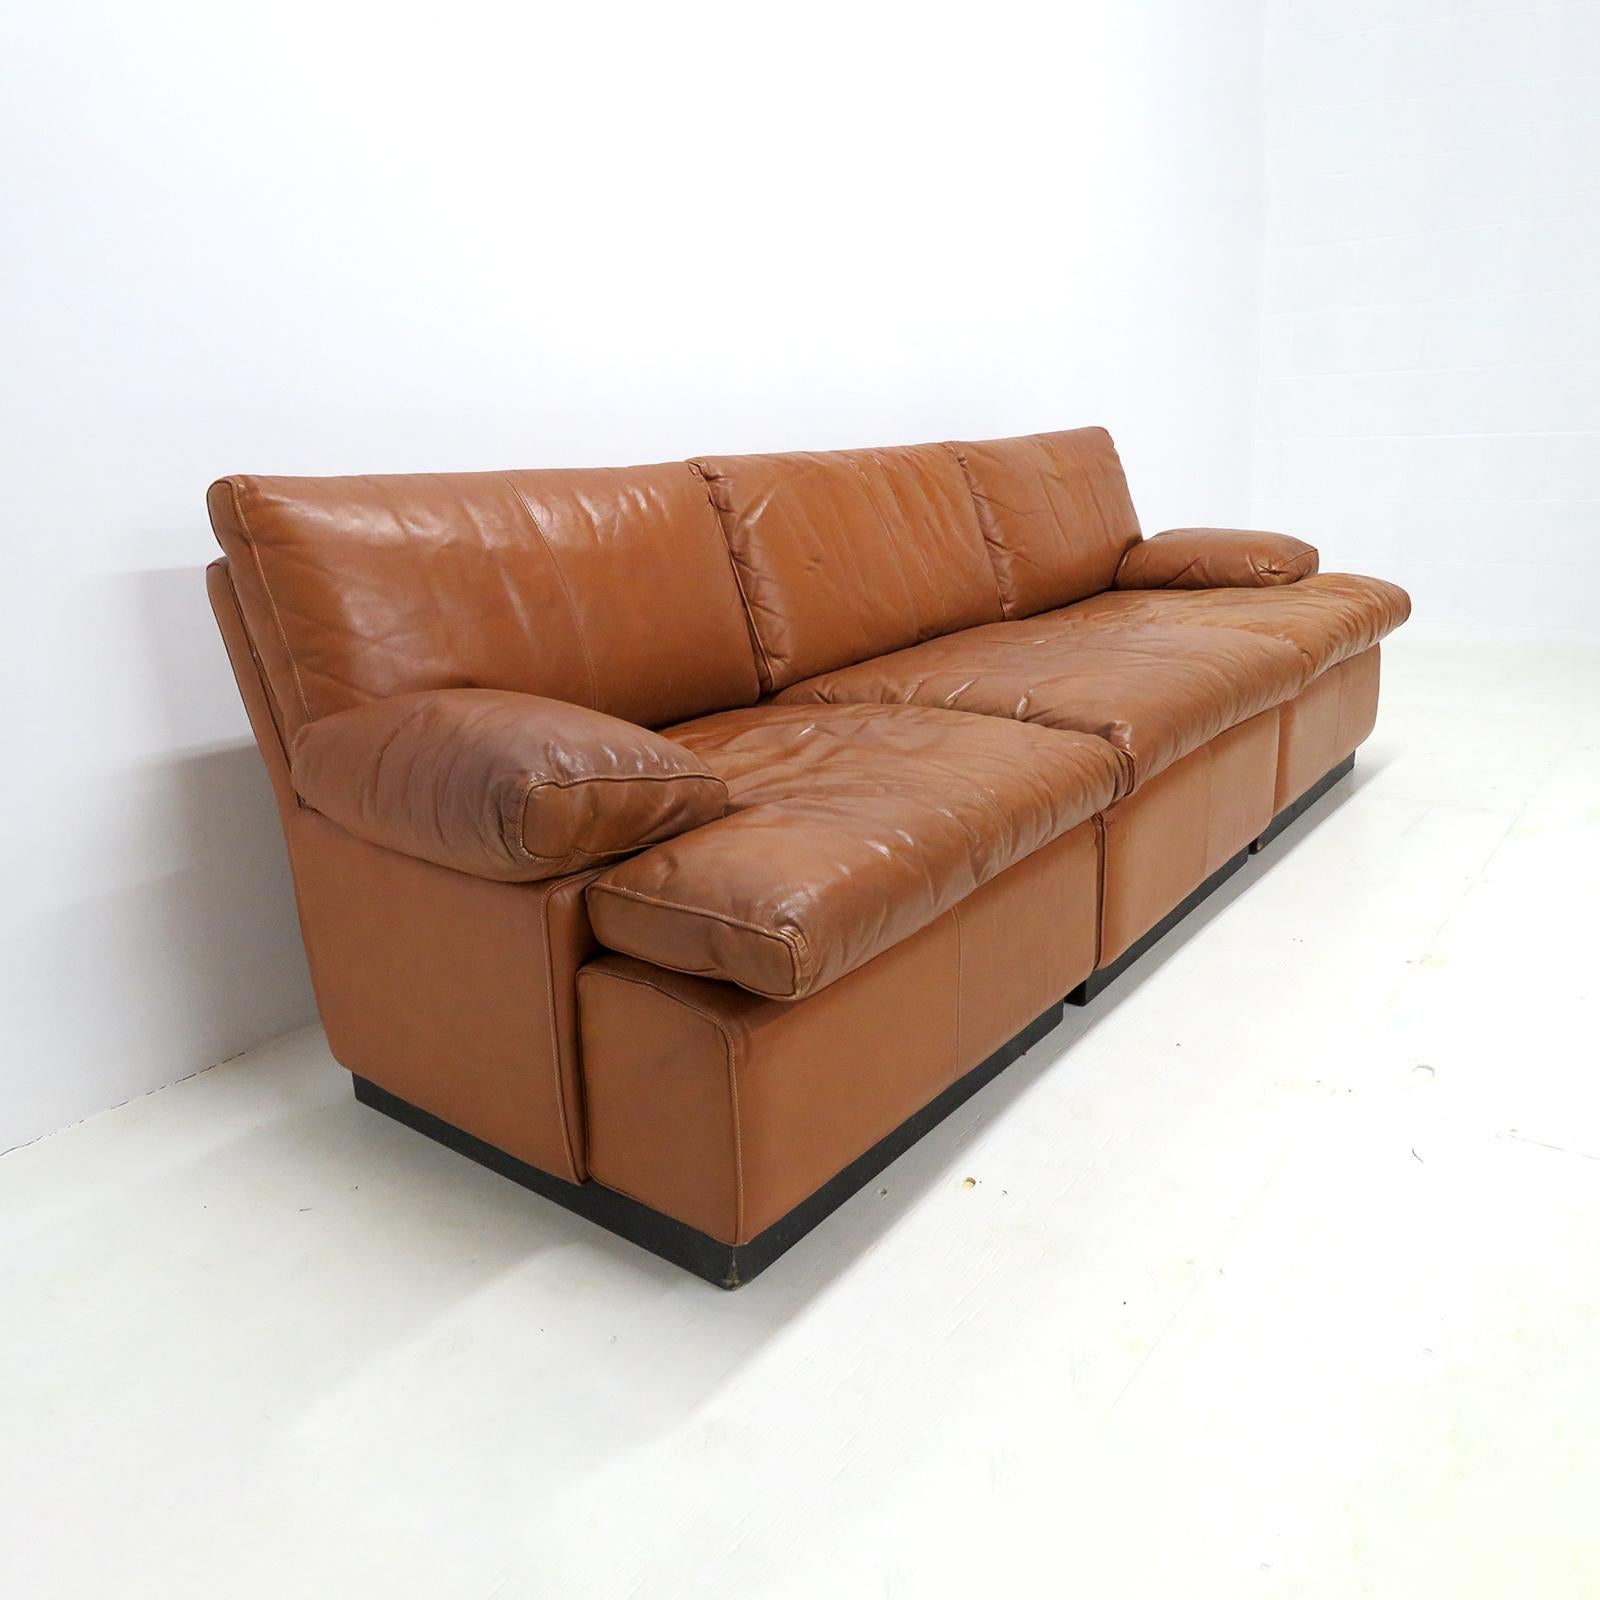 Finnish Modular Leather Sofa by BJ Dahlquist, 1970 For Sale 1